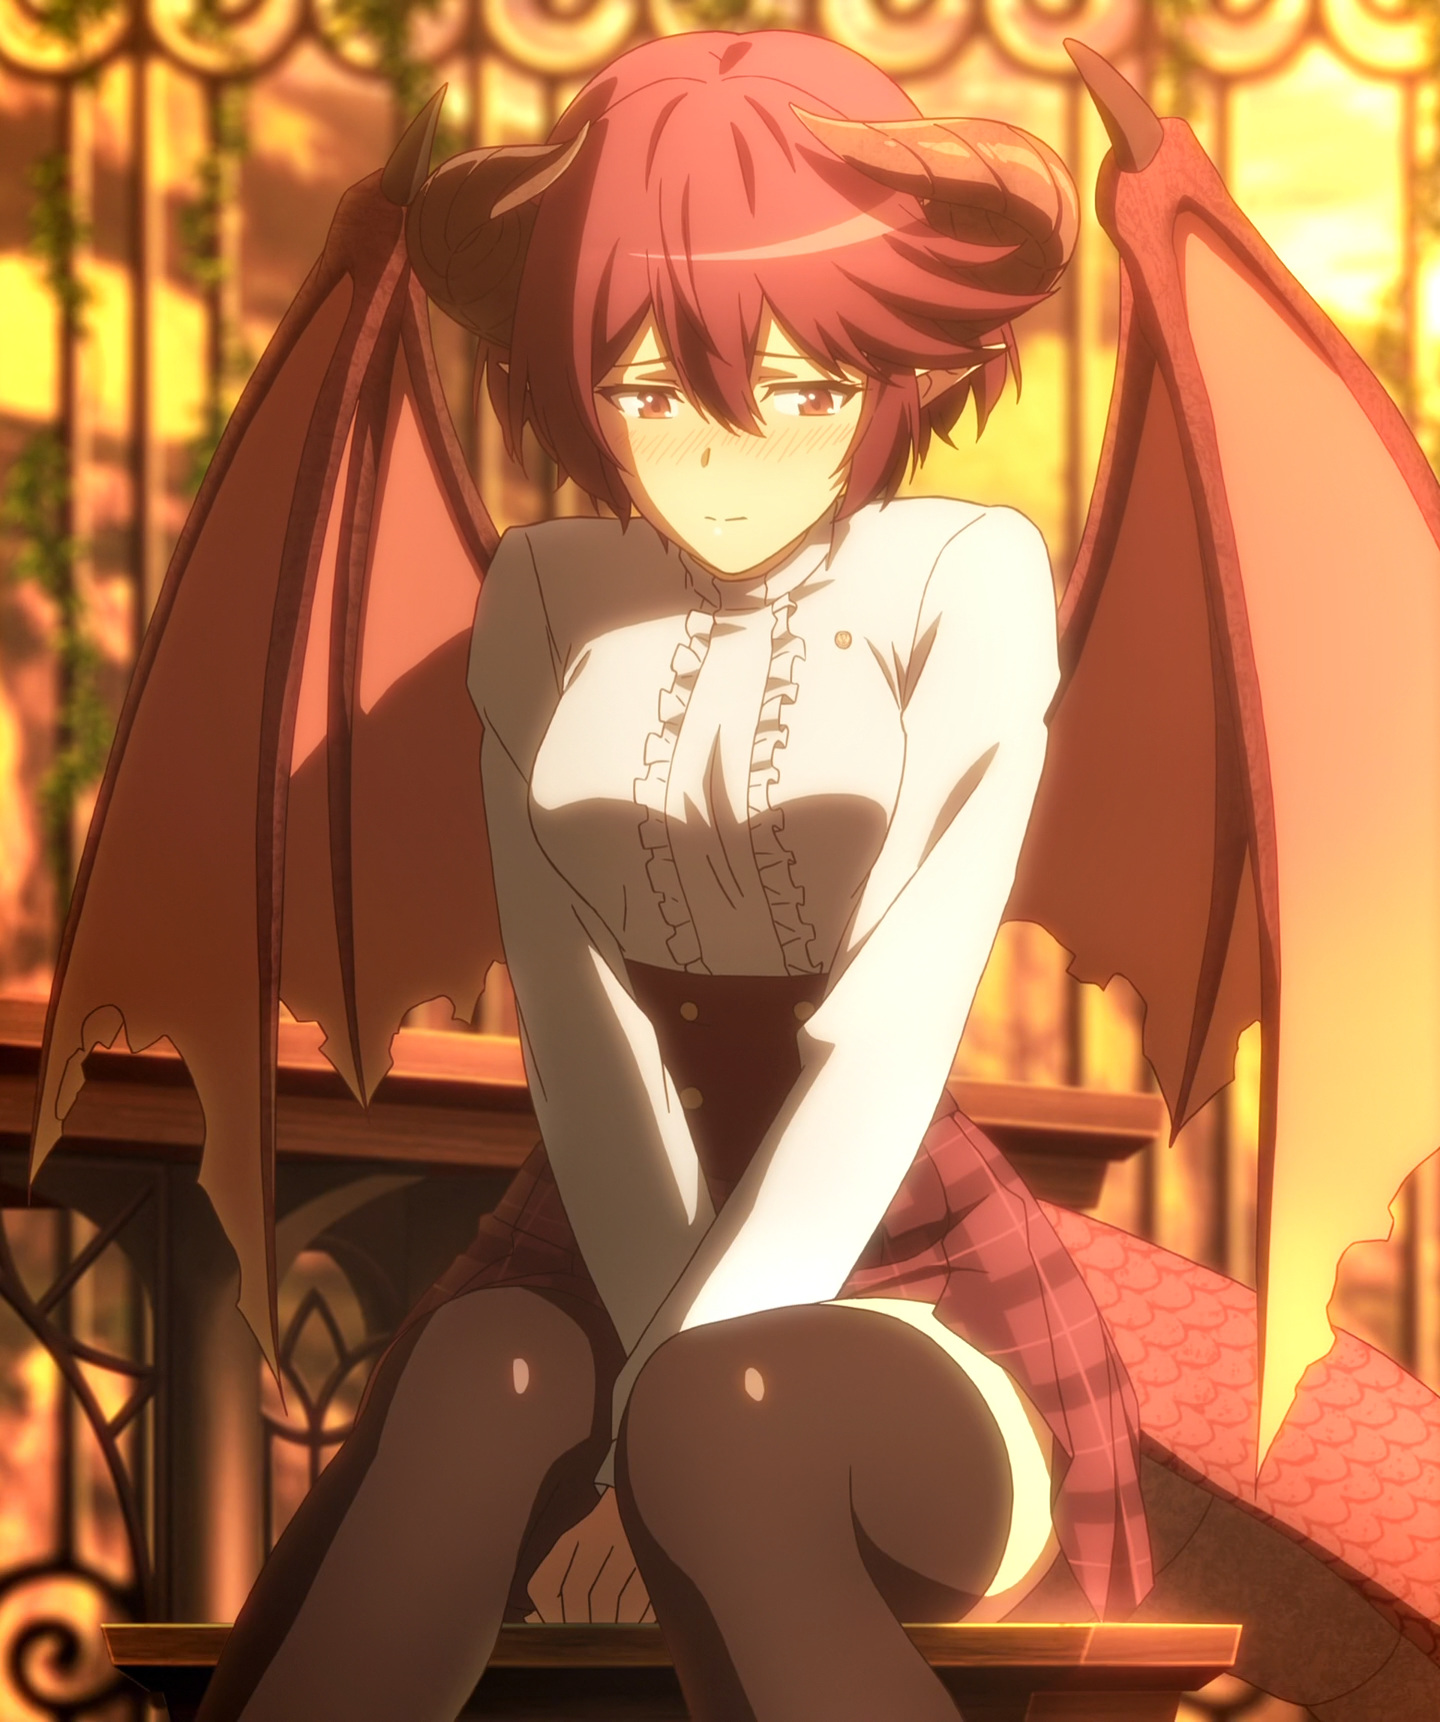 I Just Can't Understand What Manaria Friends Is Going For! - Anime